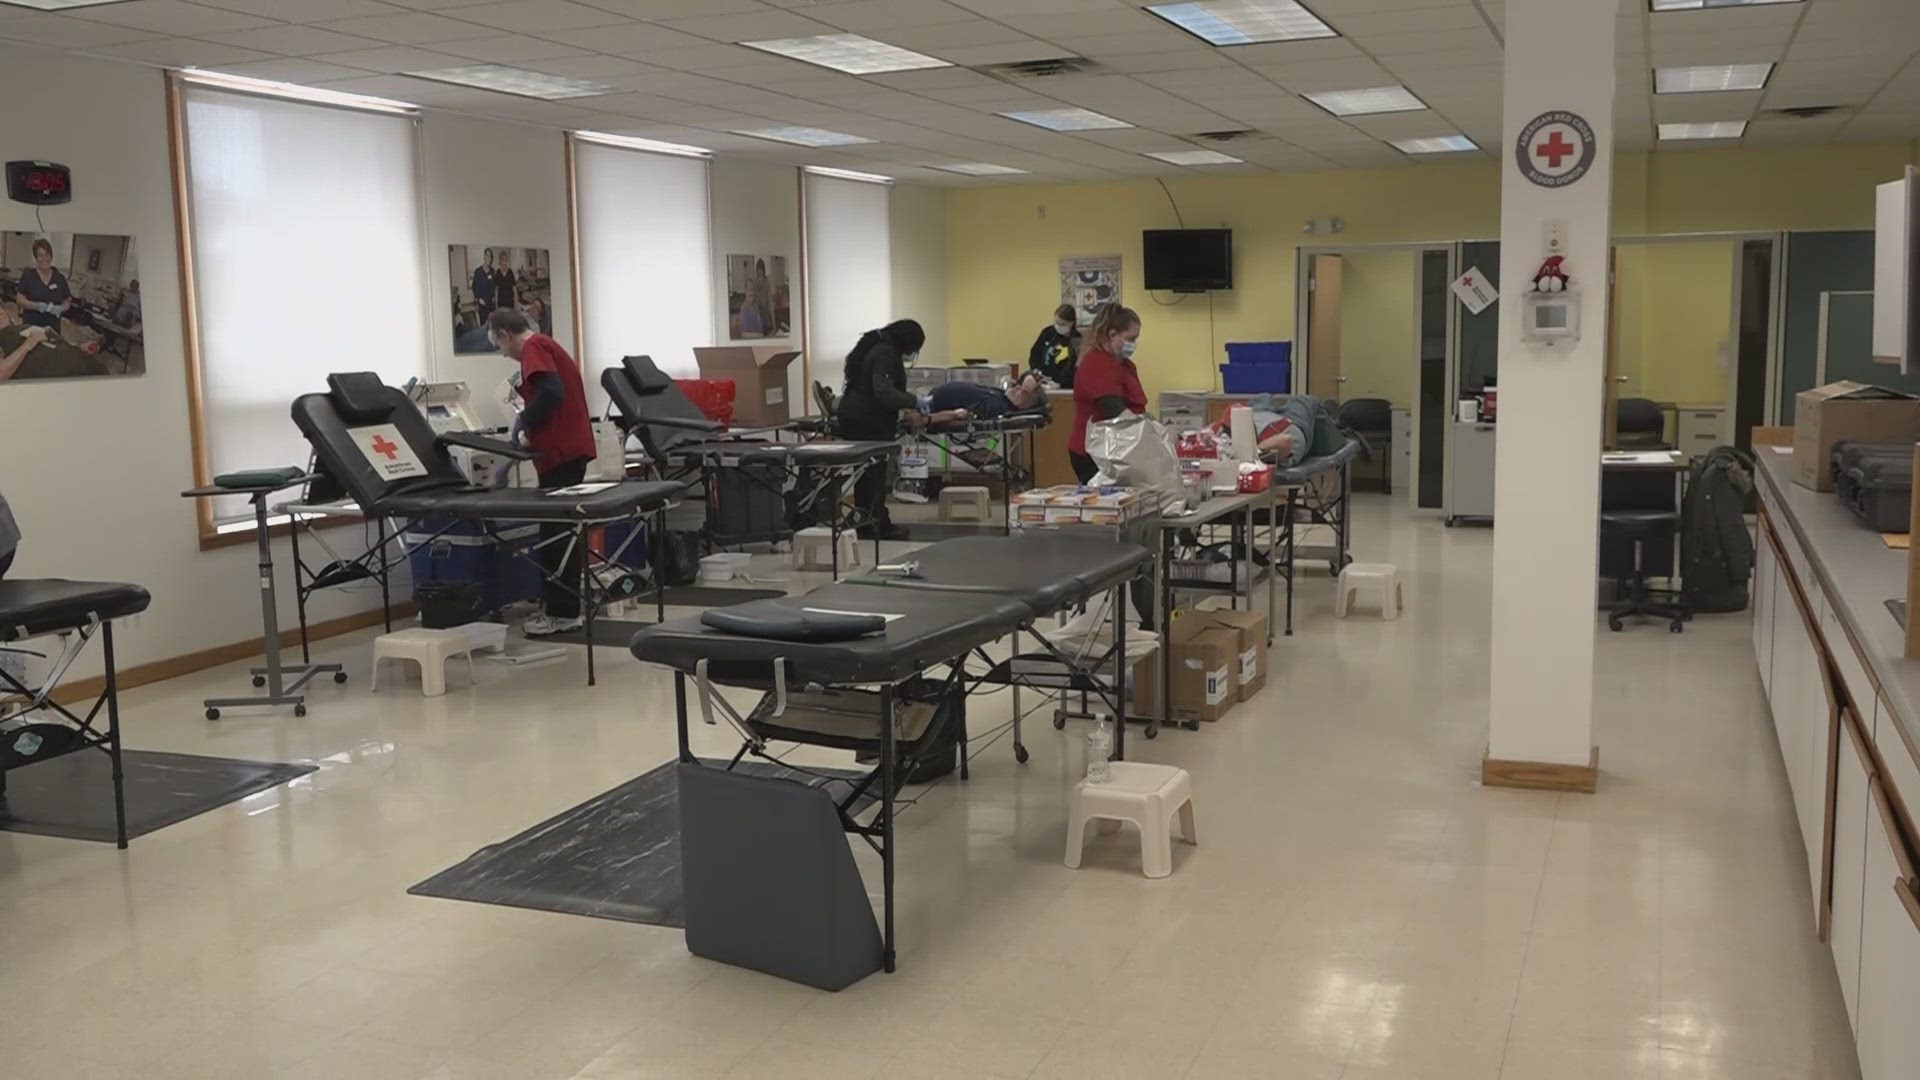 Someone in the U.S. needs blood every 2 seconds, according to the American Red Cross. That's why we partnered with them to host blood drives across the state.